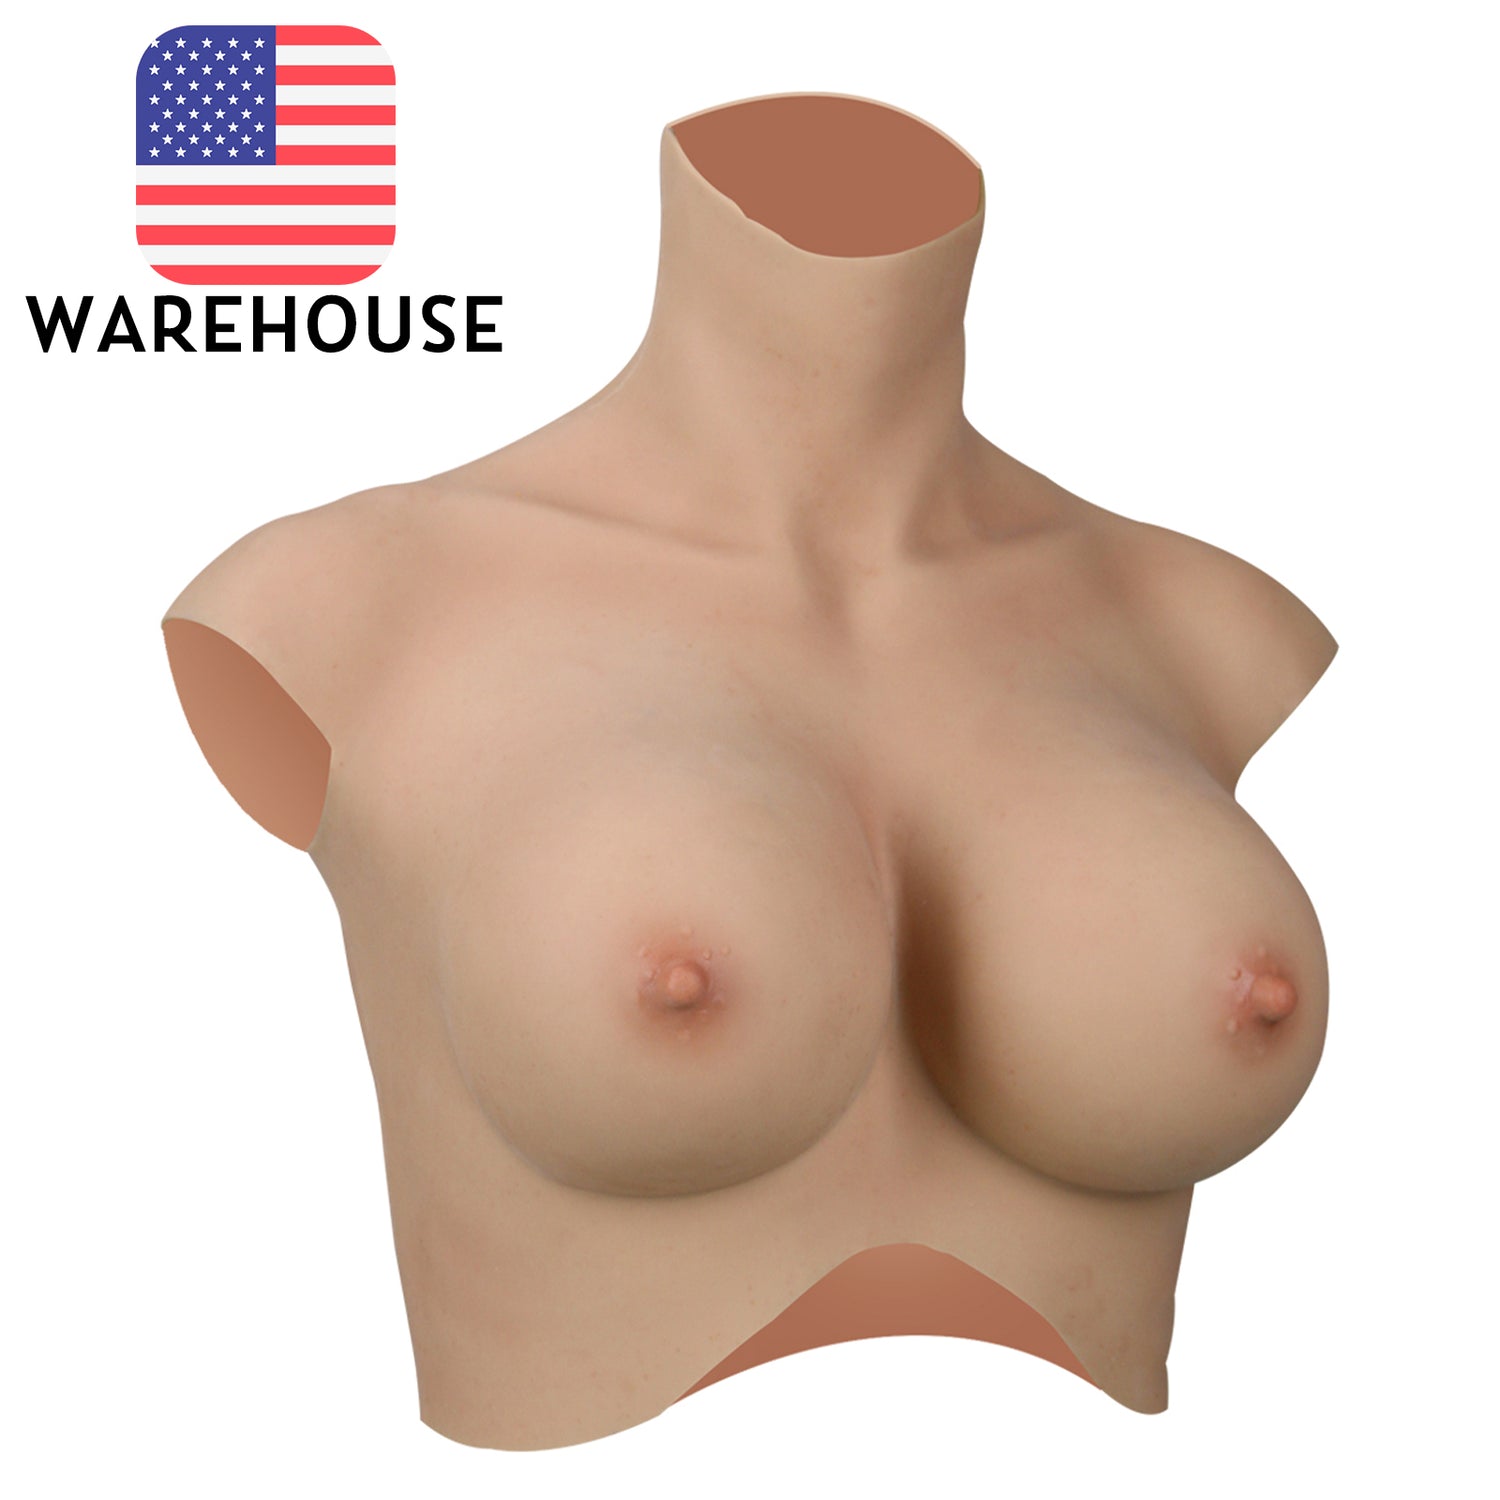 H CUP Realistic Silicone Breast Forms 7G for Crossdresser Drag Queen